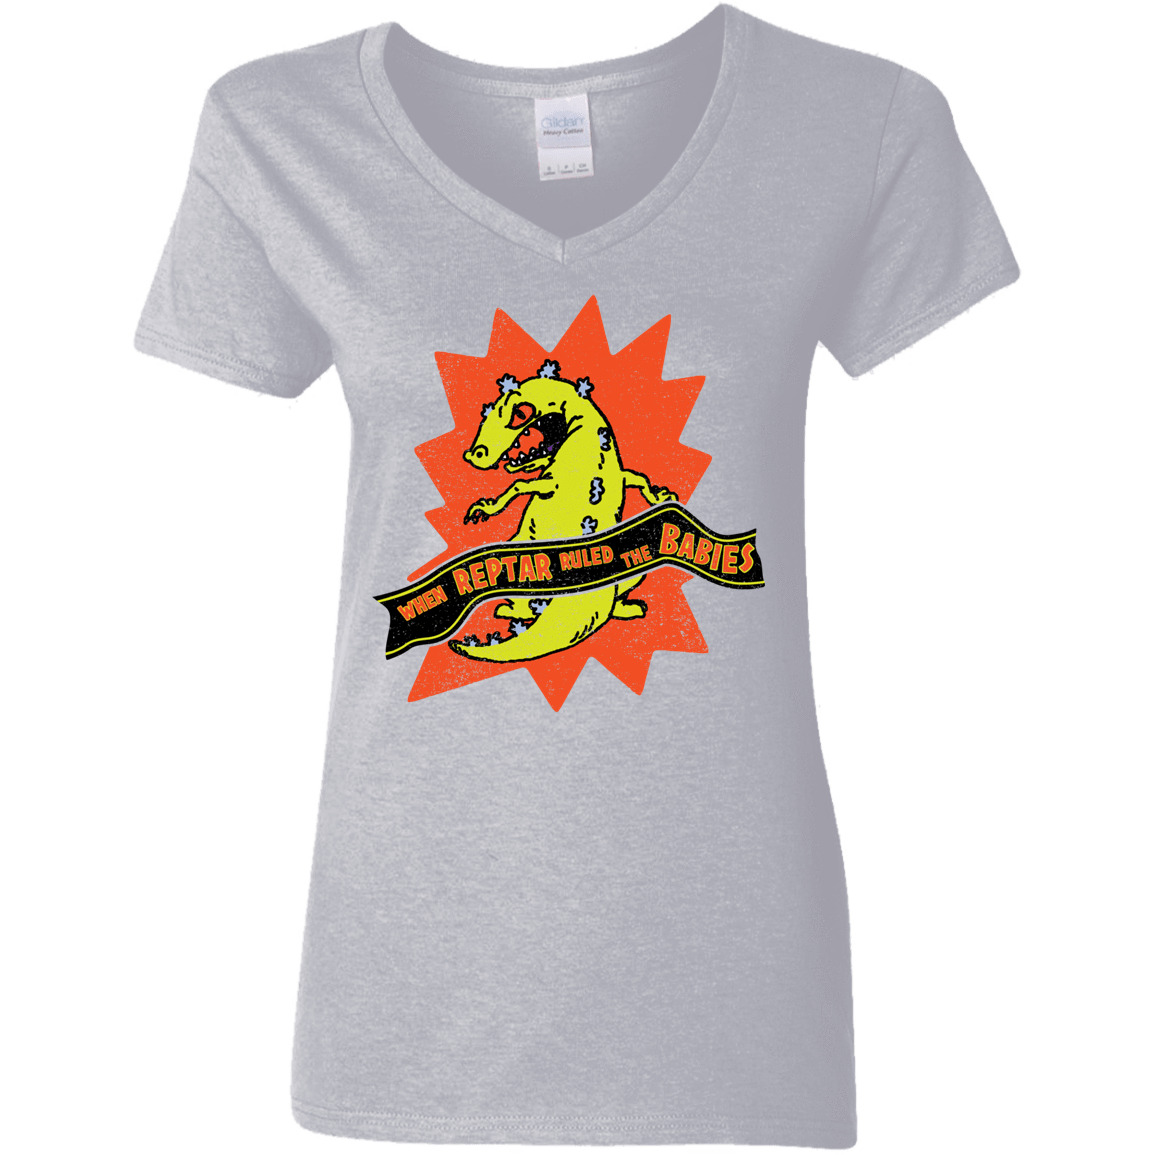 T-Shirts Sport Grey / S When Reptar Ruled The Babies Women's V-Neck T-Shirt